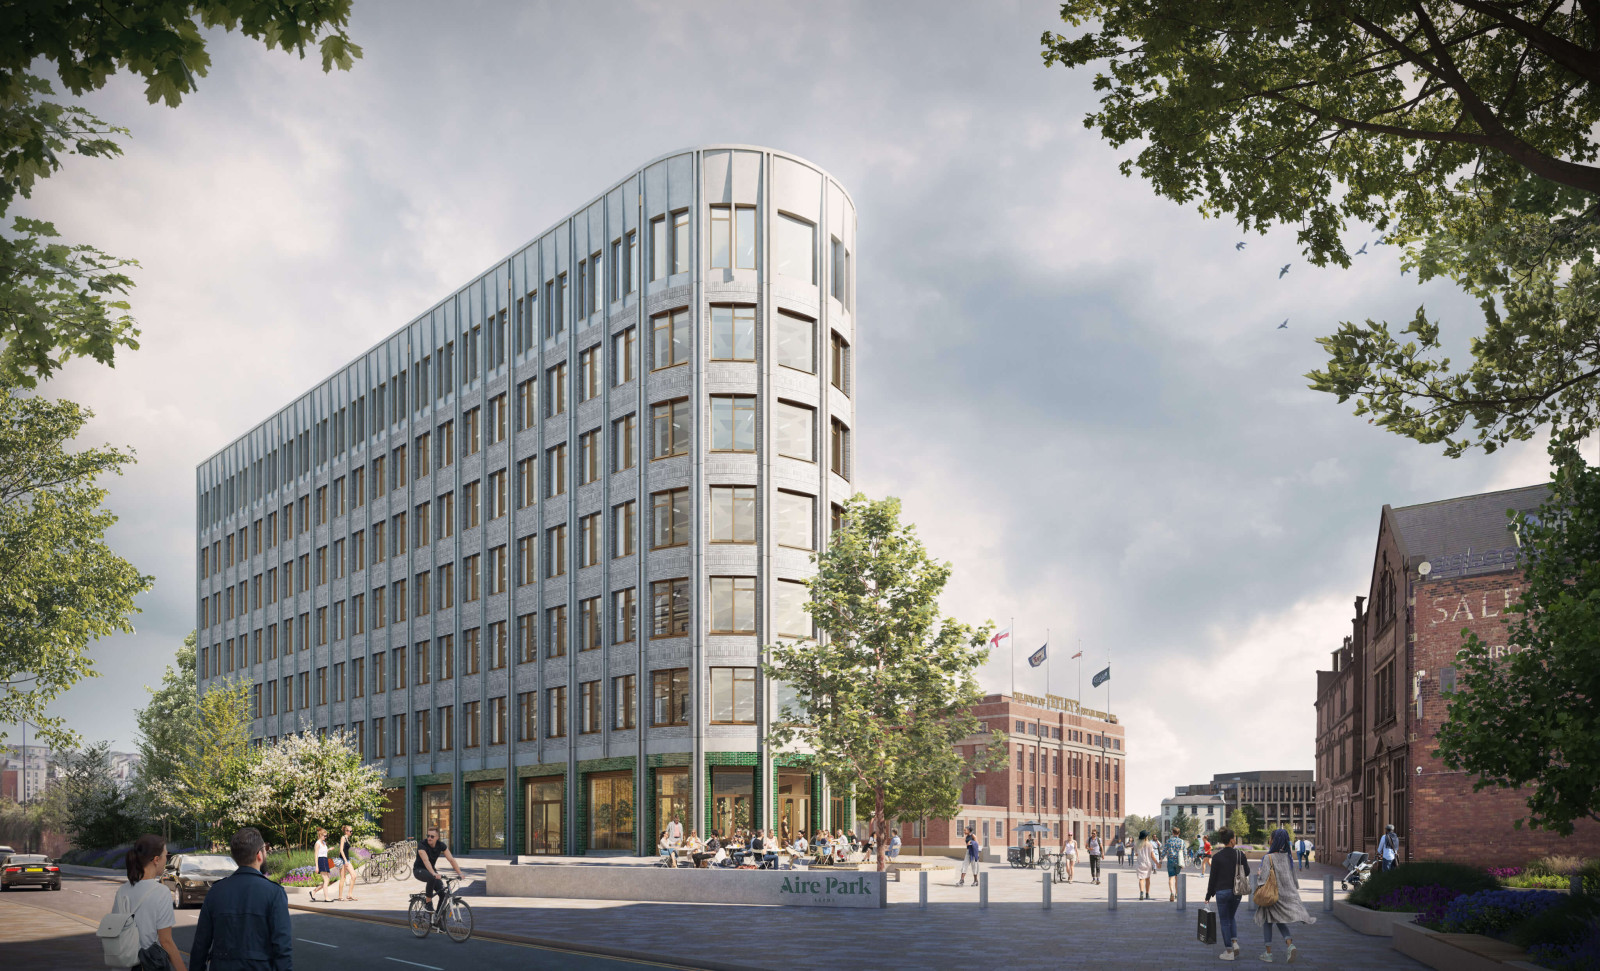 Planning approval for Leeds office development